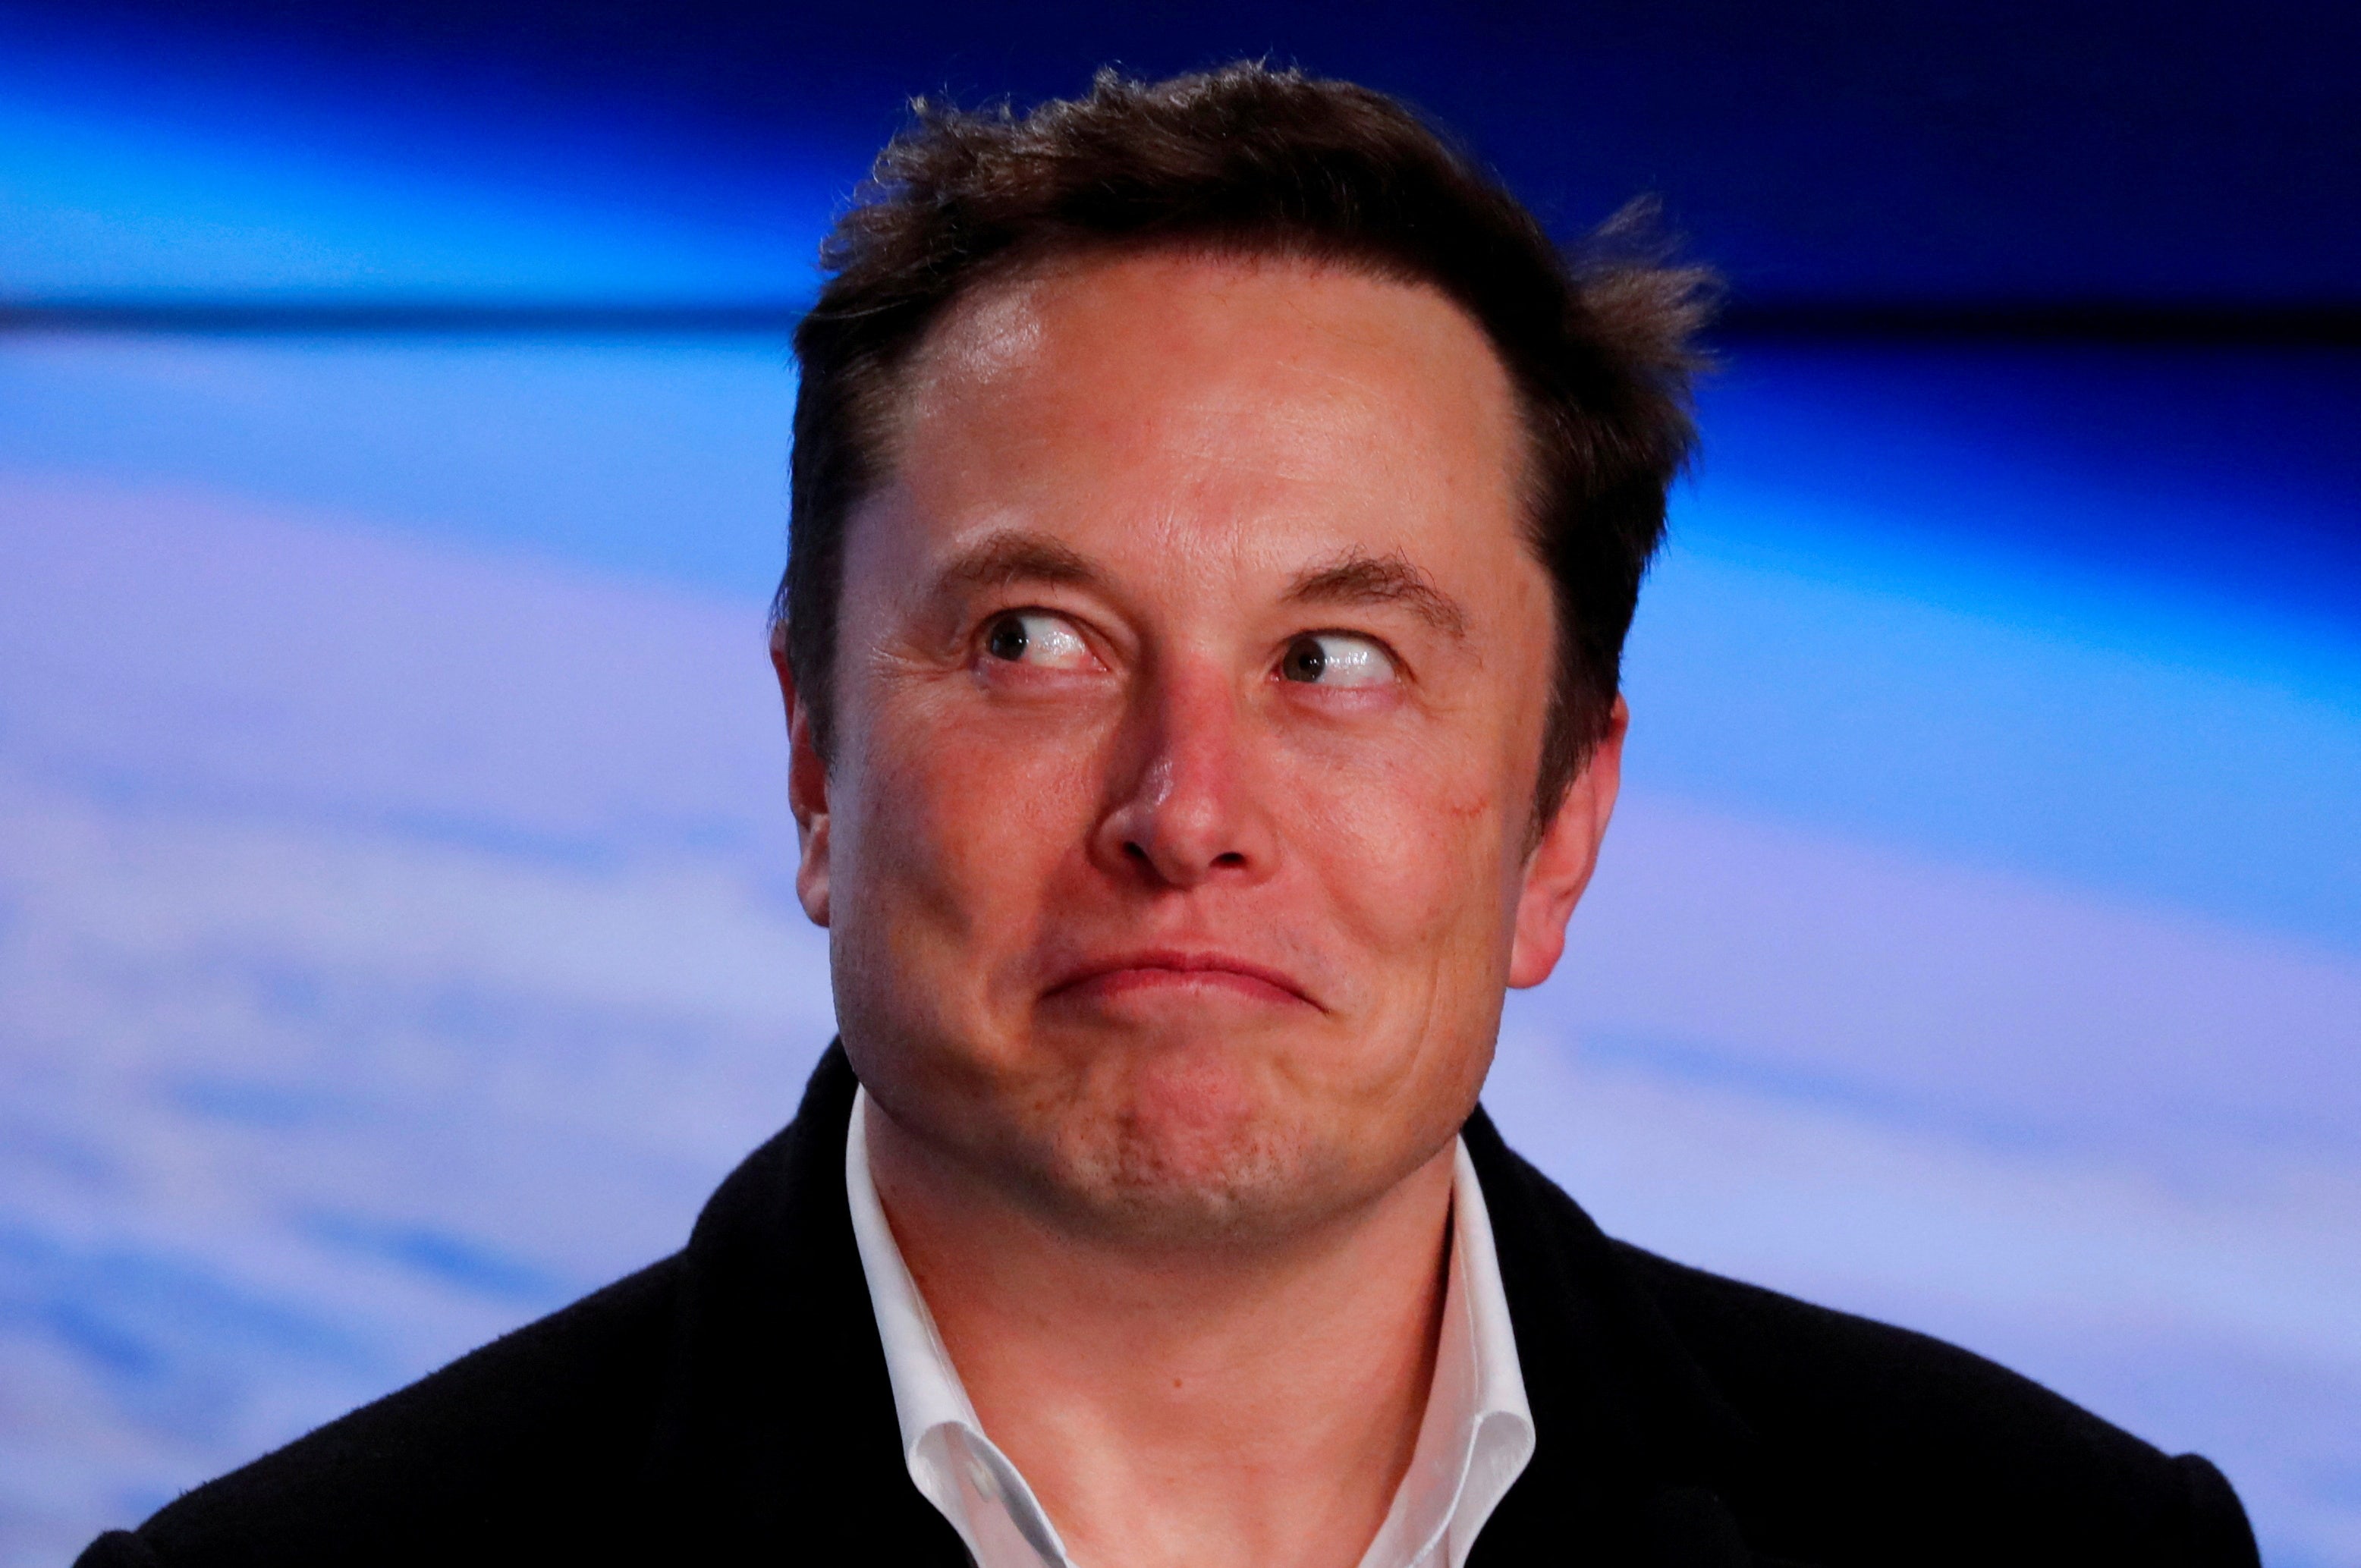 What I would do if I were Elon Musk taking over Twitter: Let freedom reign